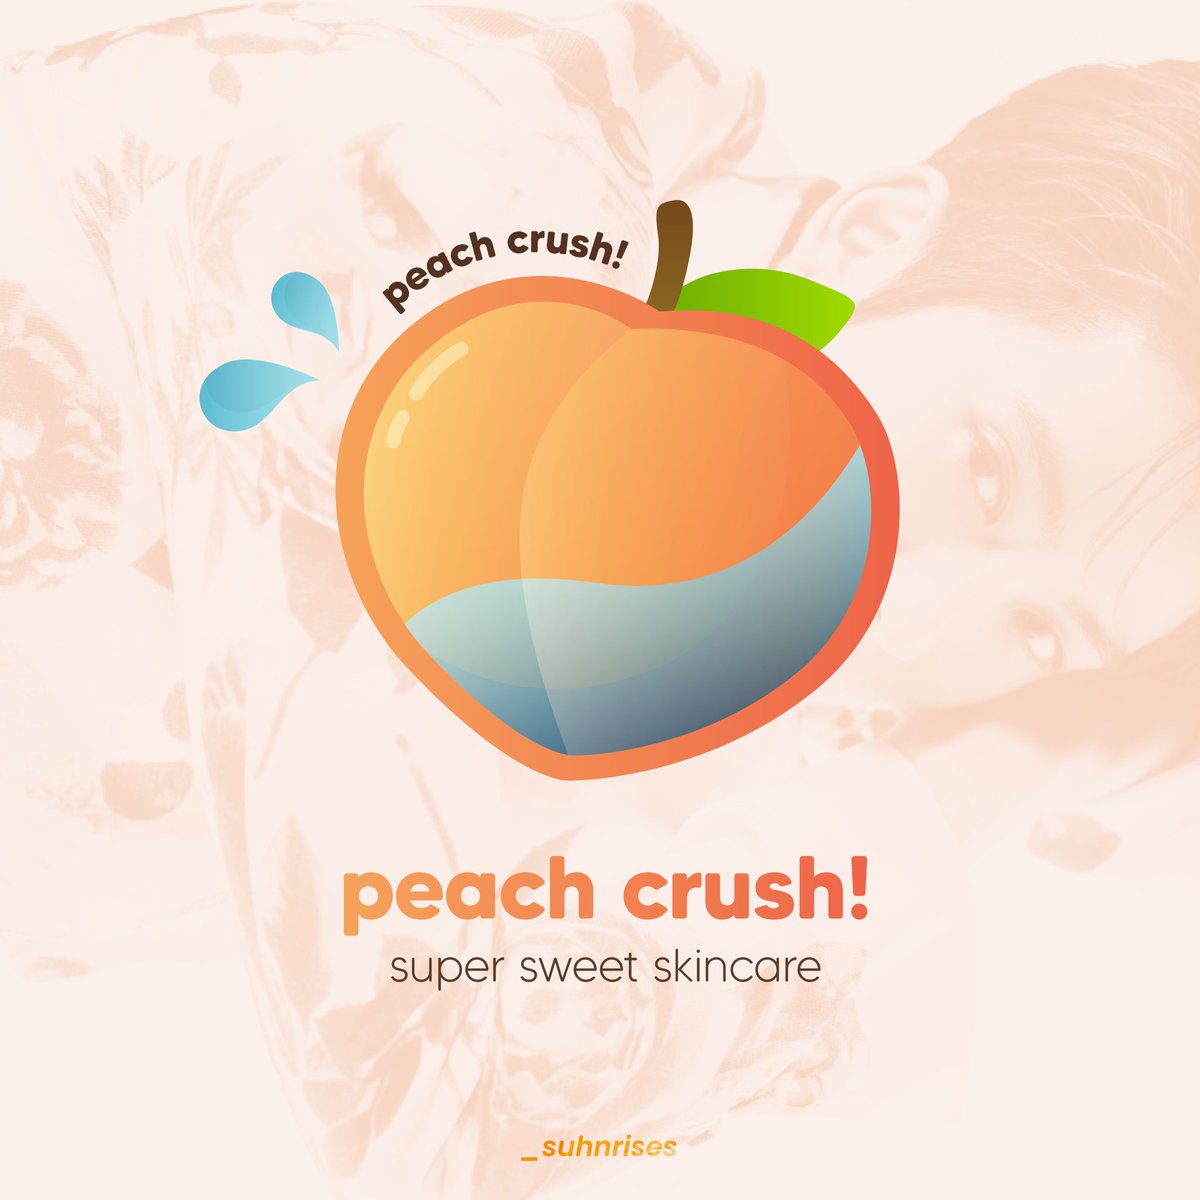 jaehyun: peach crush!- skincare brand - jaehyun does the bare minimum skincare and has perfect skin literally how- probably overpriced and 80% water BUT SMELLS AND LOOKS REALLY GOOD so u keep buying it